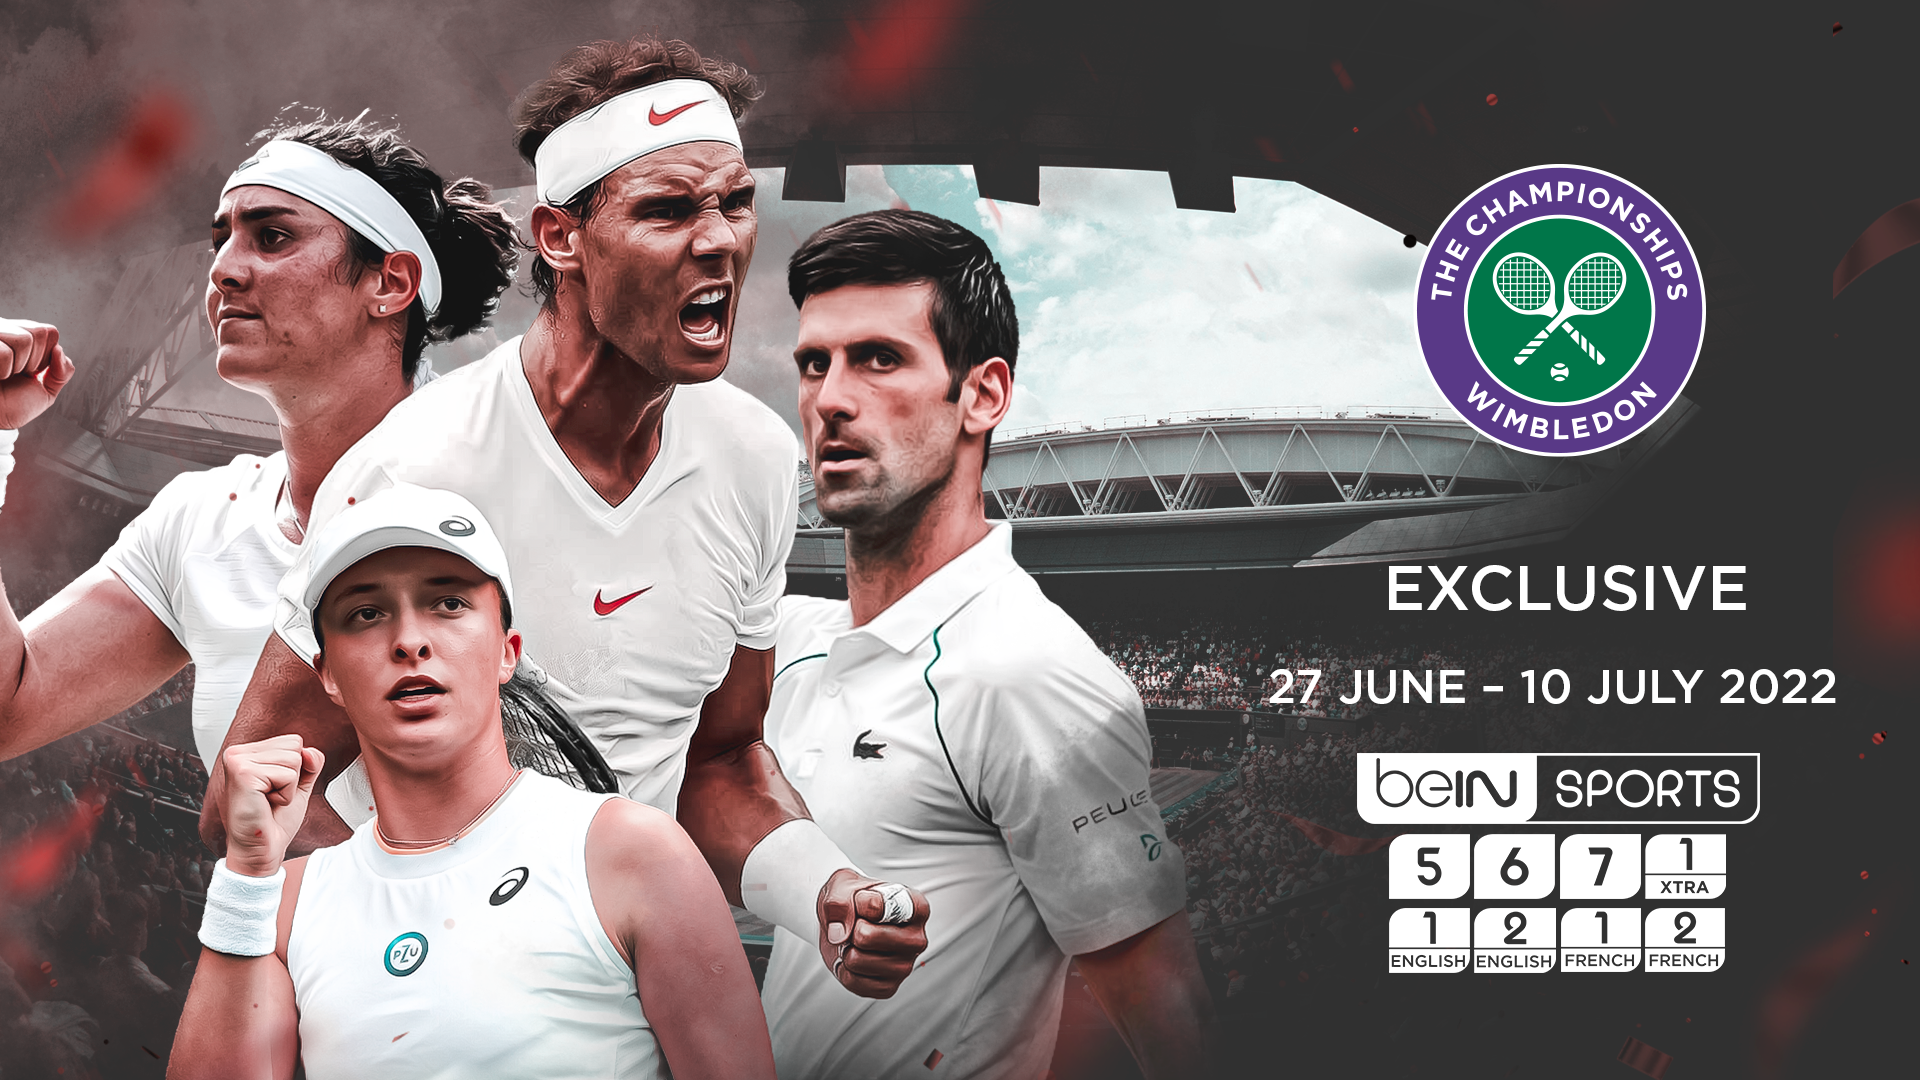 beIN SPORTS to Broadcast Upcoming 2022 Wimbledon Championship Across MENA